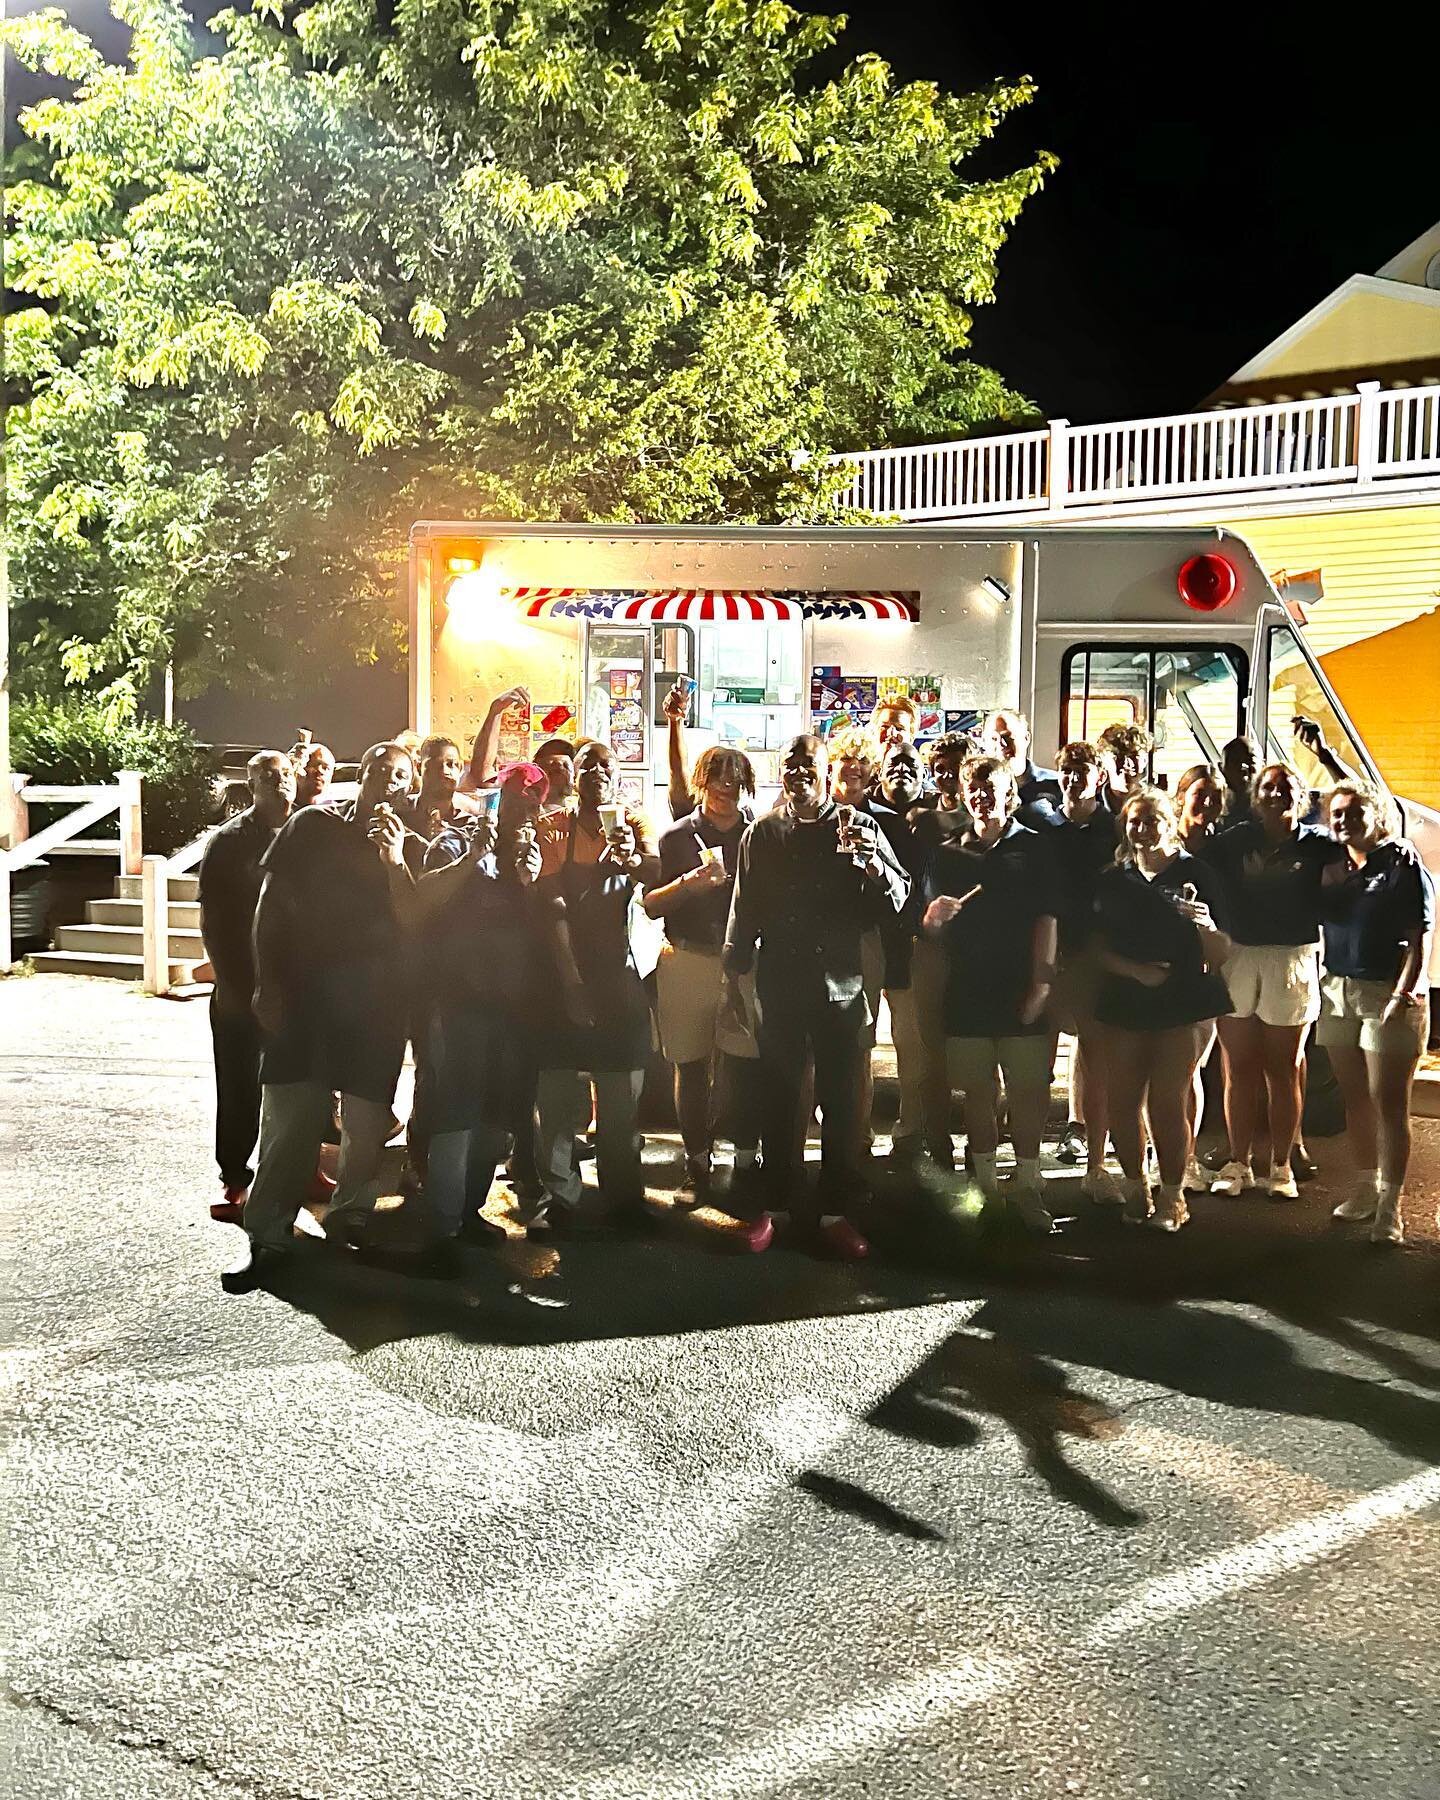 A late night visit from @perryslaststand ice cream truck gives this hard working crew a nice break! #bestcrew #icecream #sofun